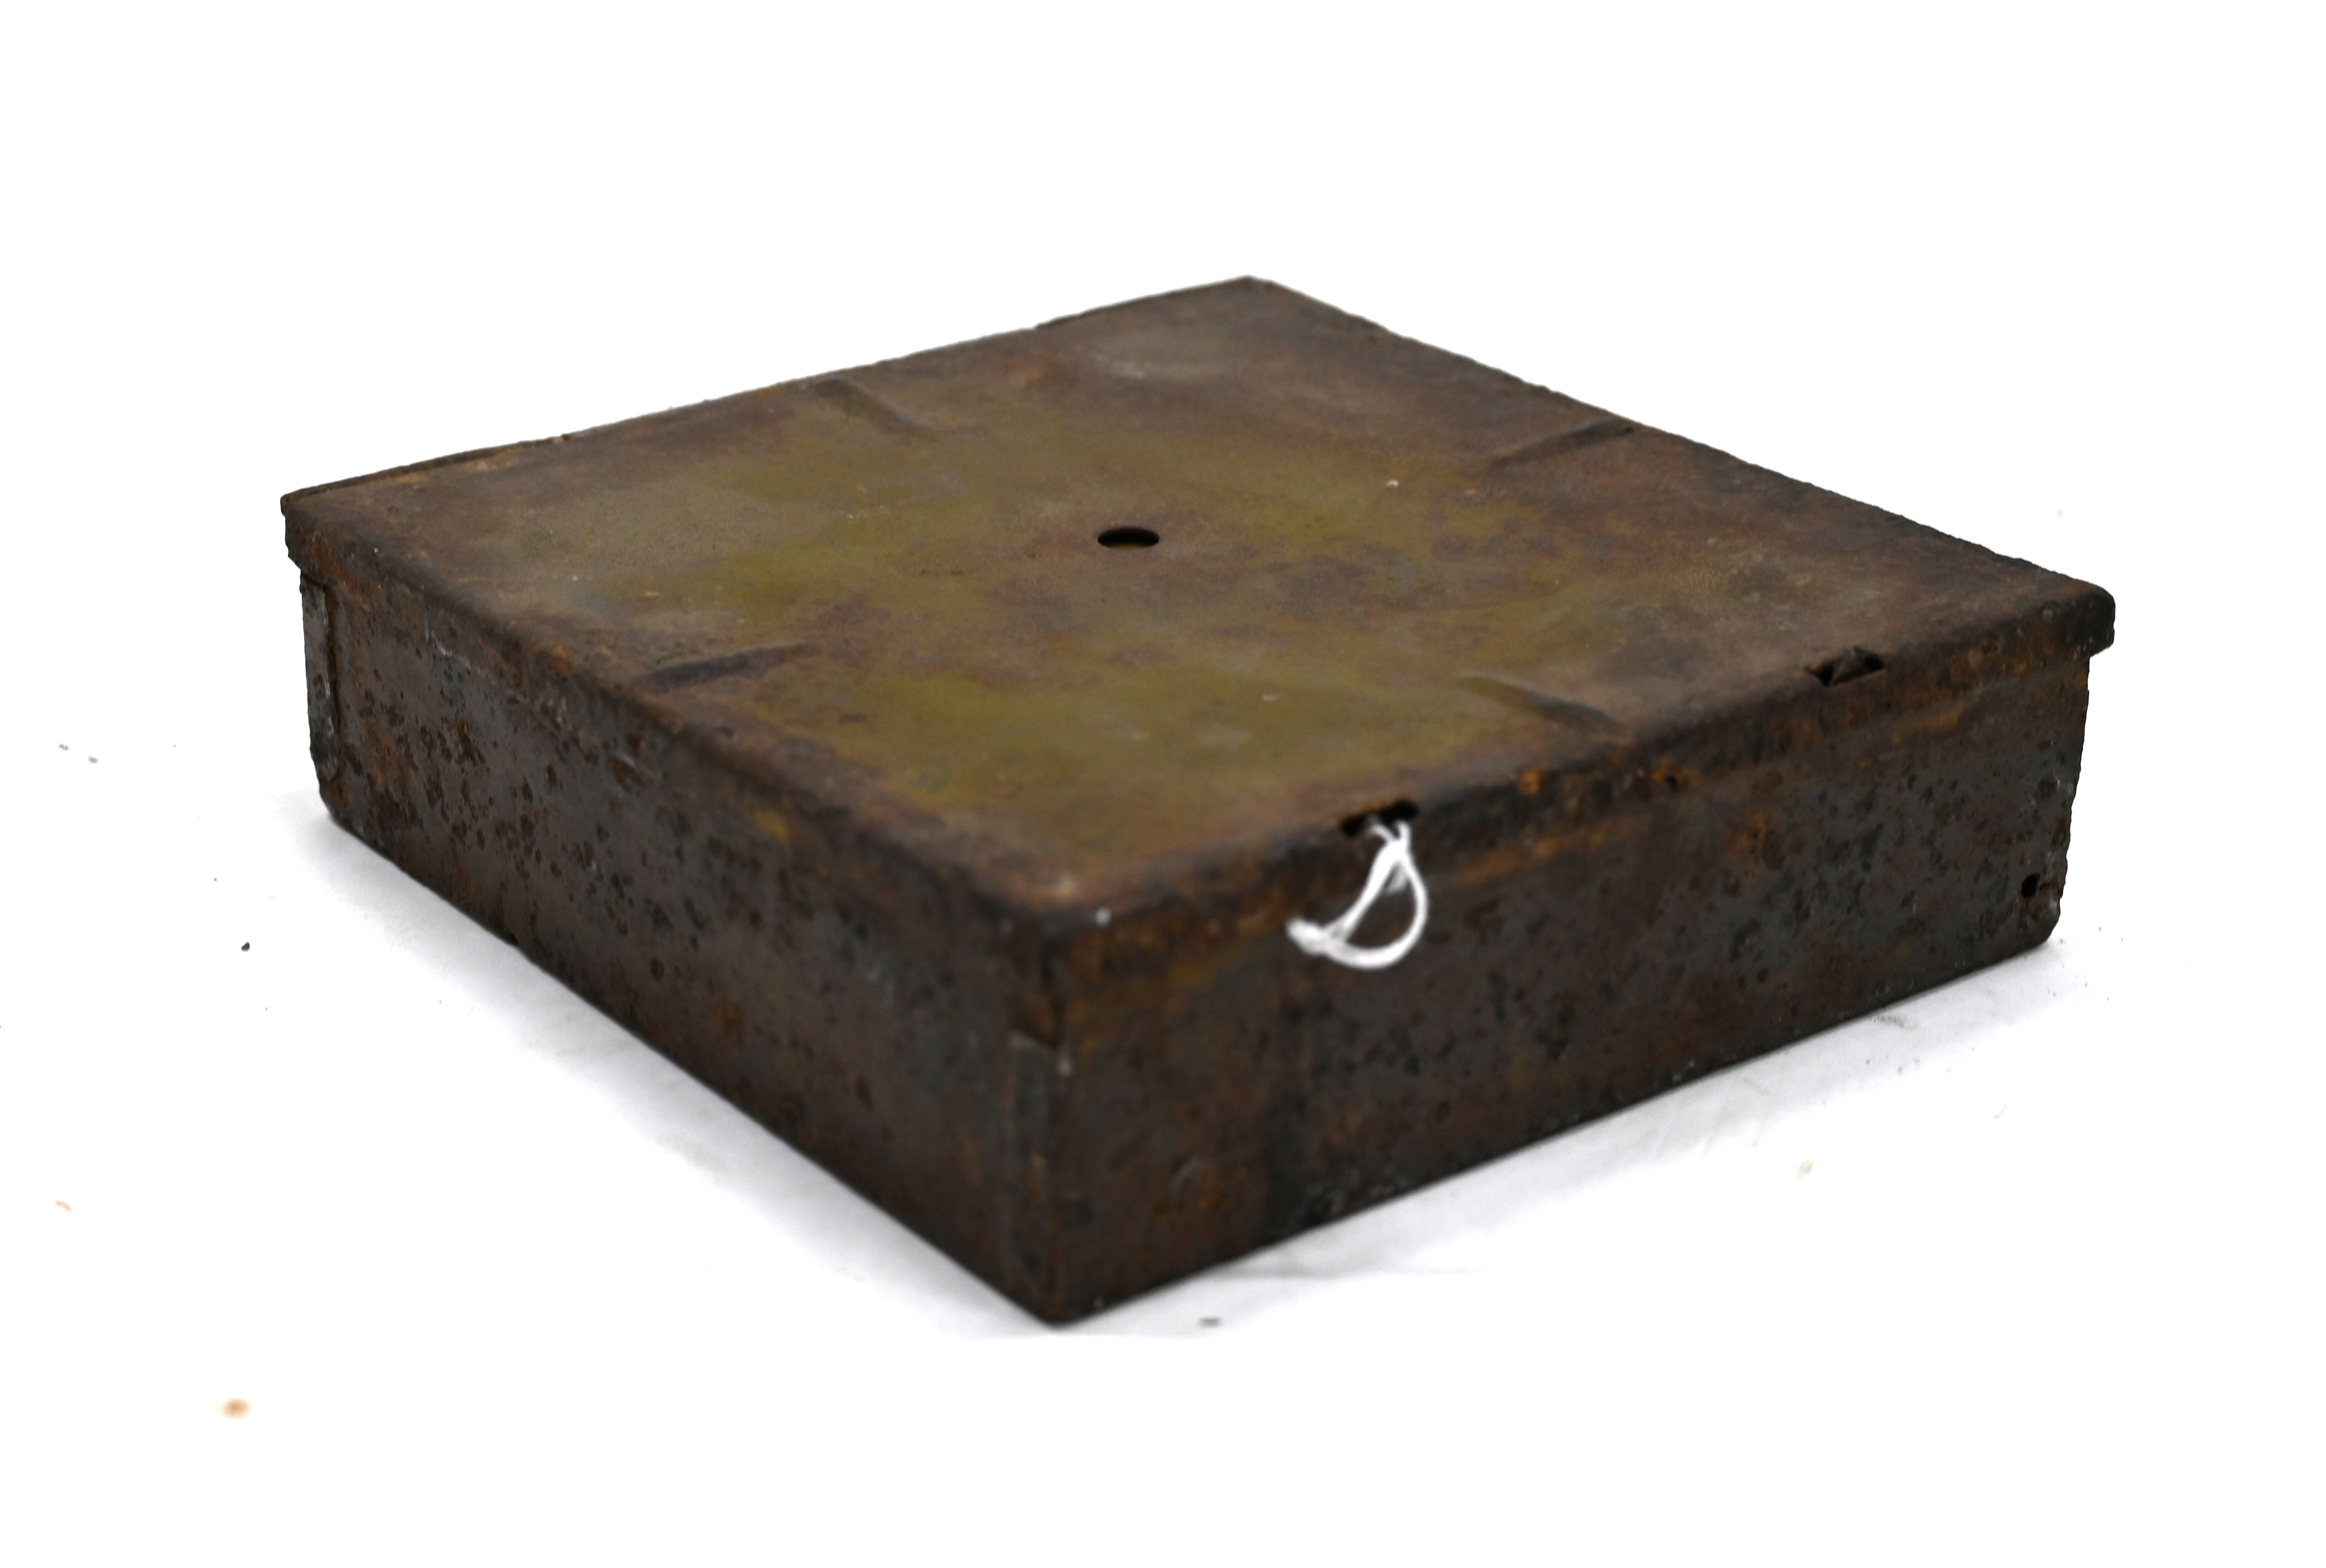 TM-35 Soviet anti-tank mine, World War Two-era, in dug condition. Dimensions: 22.5cm wide by 22.5... - Image 3 of 3